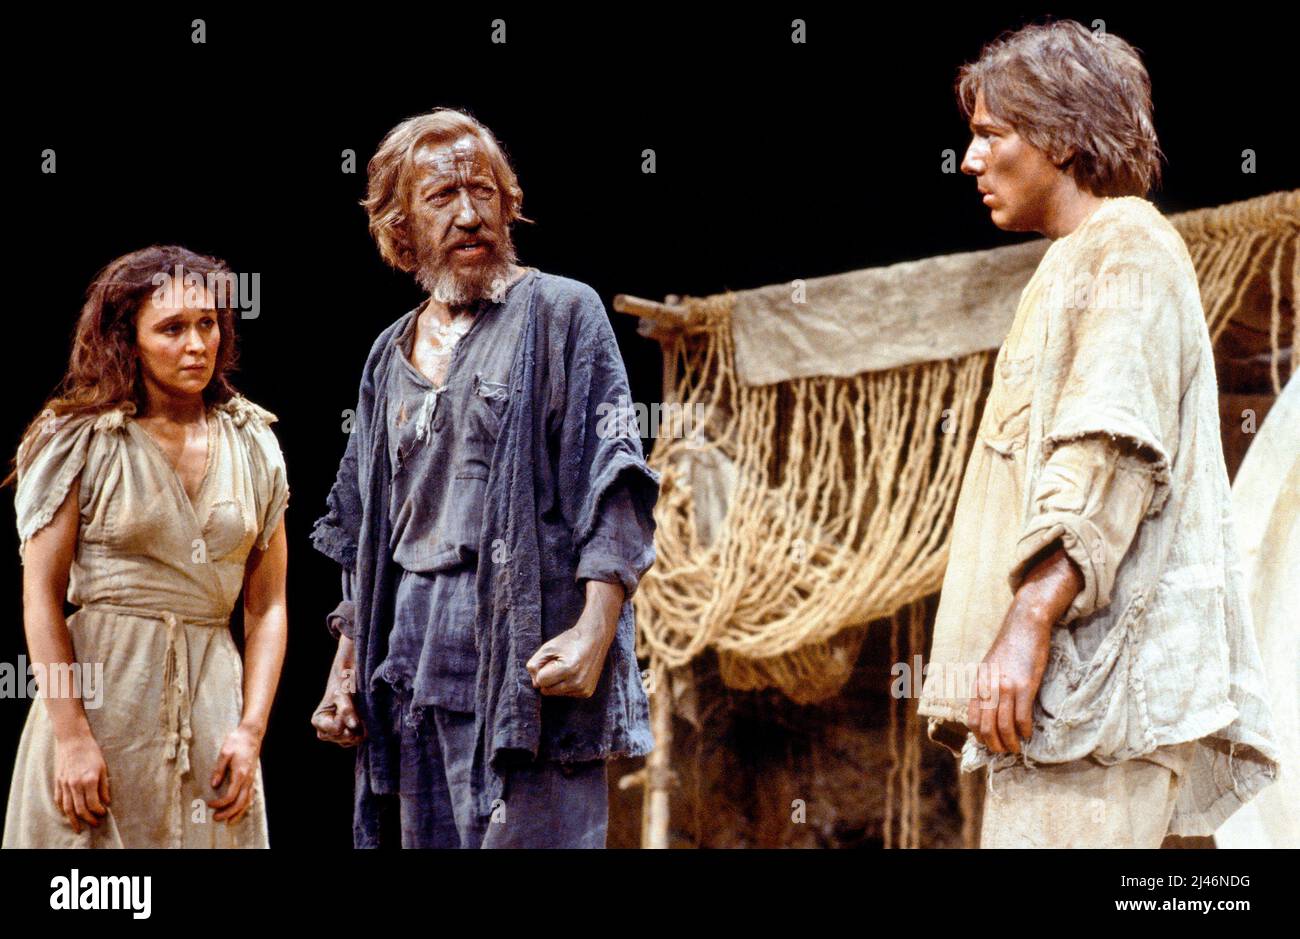 l-r: Kay Adshead (Molly Gromer), Leonard Maguire (Jack Gromer), Billy McColl (Will Gromer) in THEE AND ME by Philip Martin at the Lyttelton Theatre, National Theatre (NT), London SE1  26/02/1980  set design: Sue Plummer  costumes: Lindy Hemming  lighting: Gerry Jenkinson  director: Michael Rudman Stock Photo